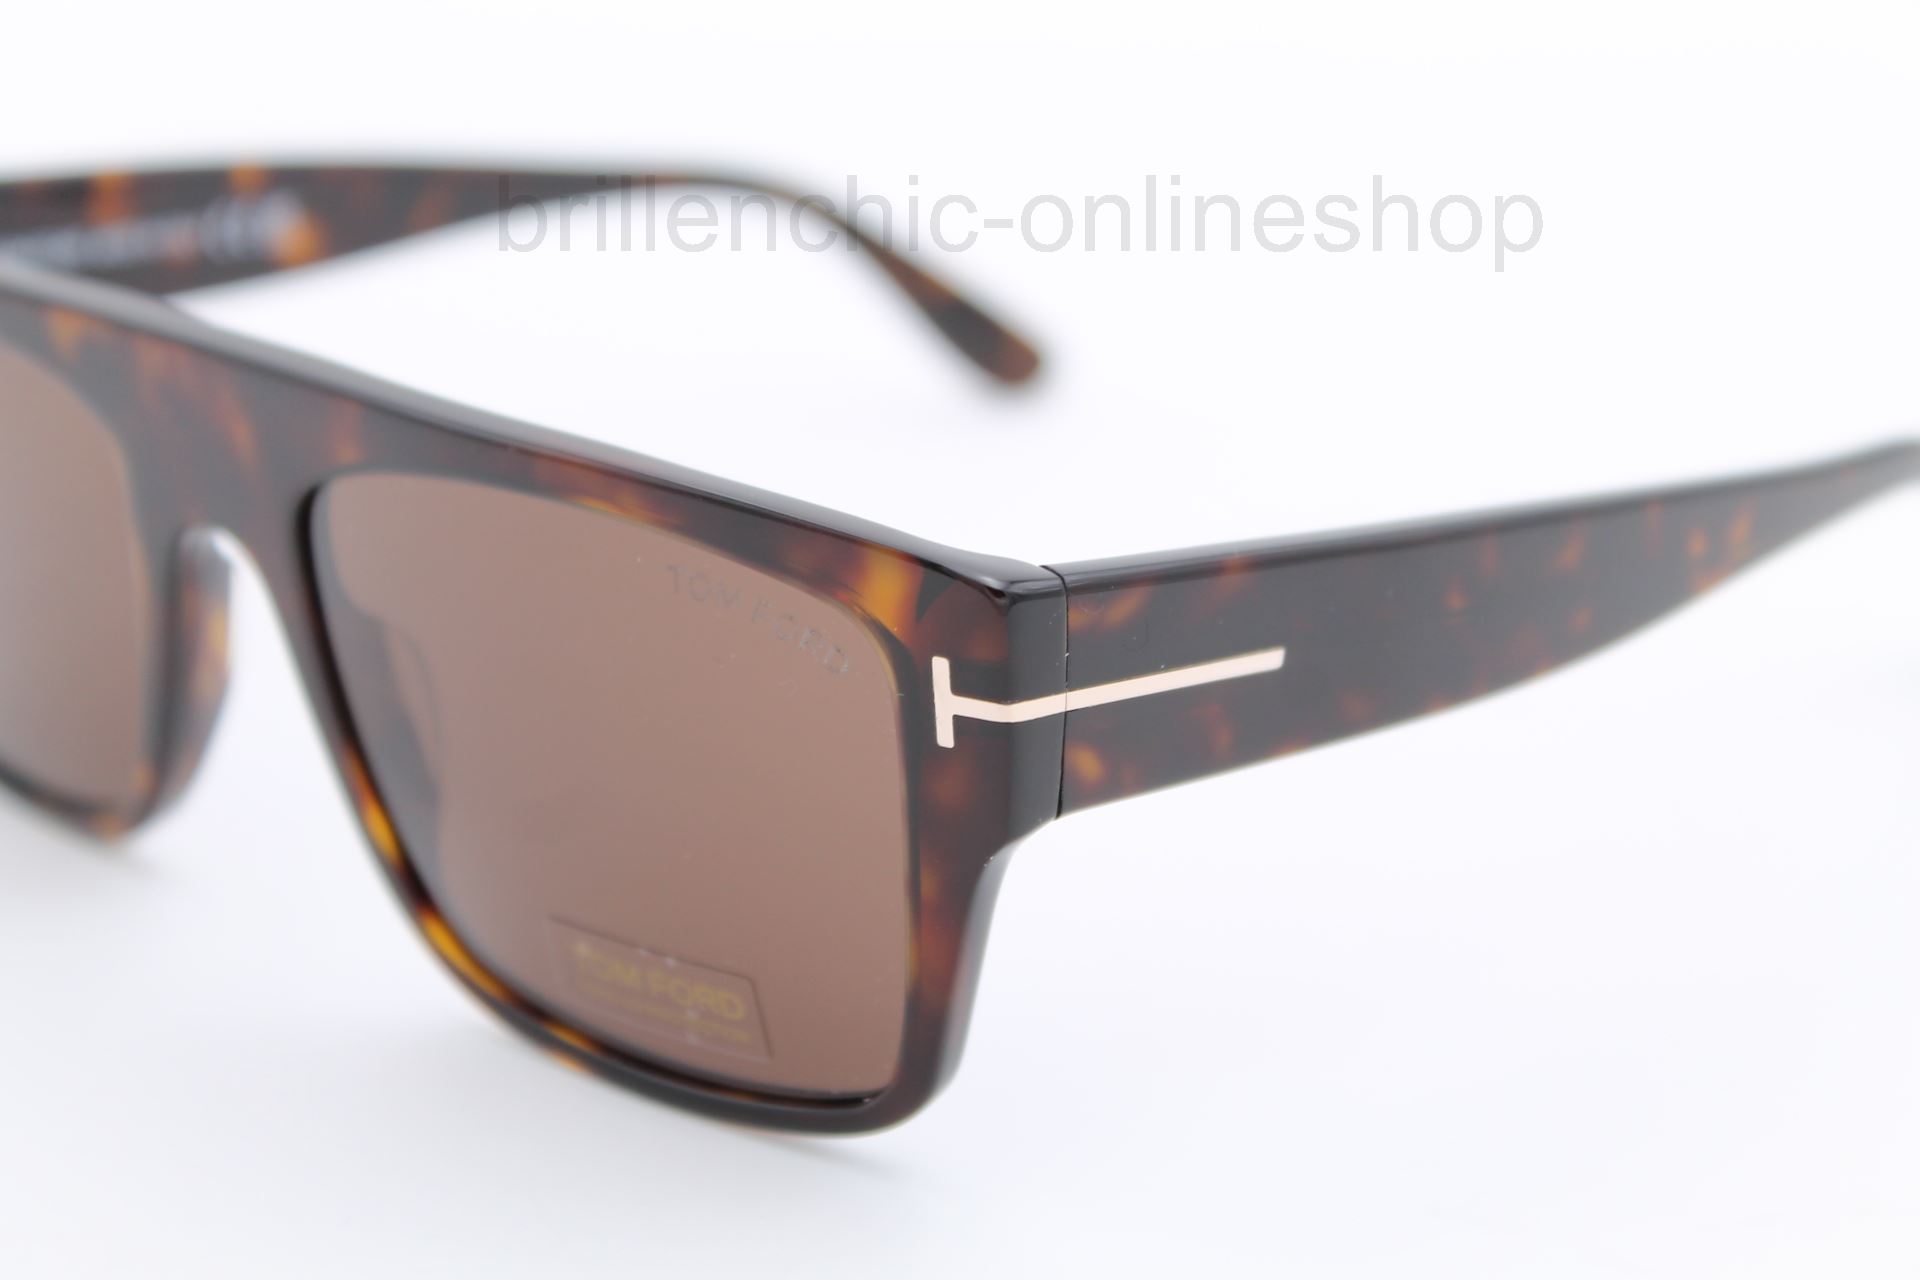 Brillenchic-onlineshop in Berlin - TOM FORD TF 907S 907 52E DUNNING 